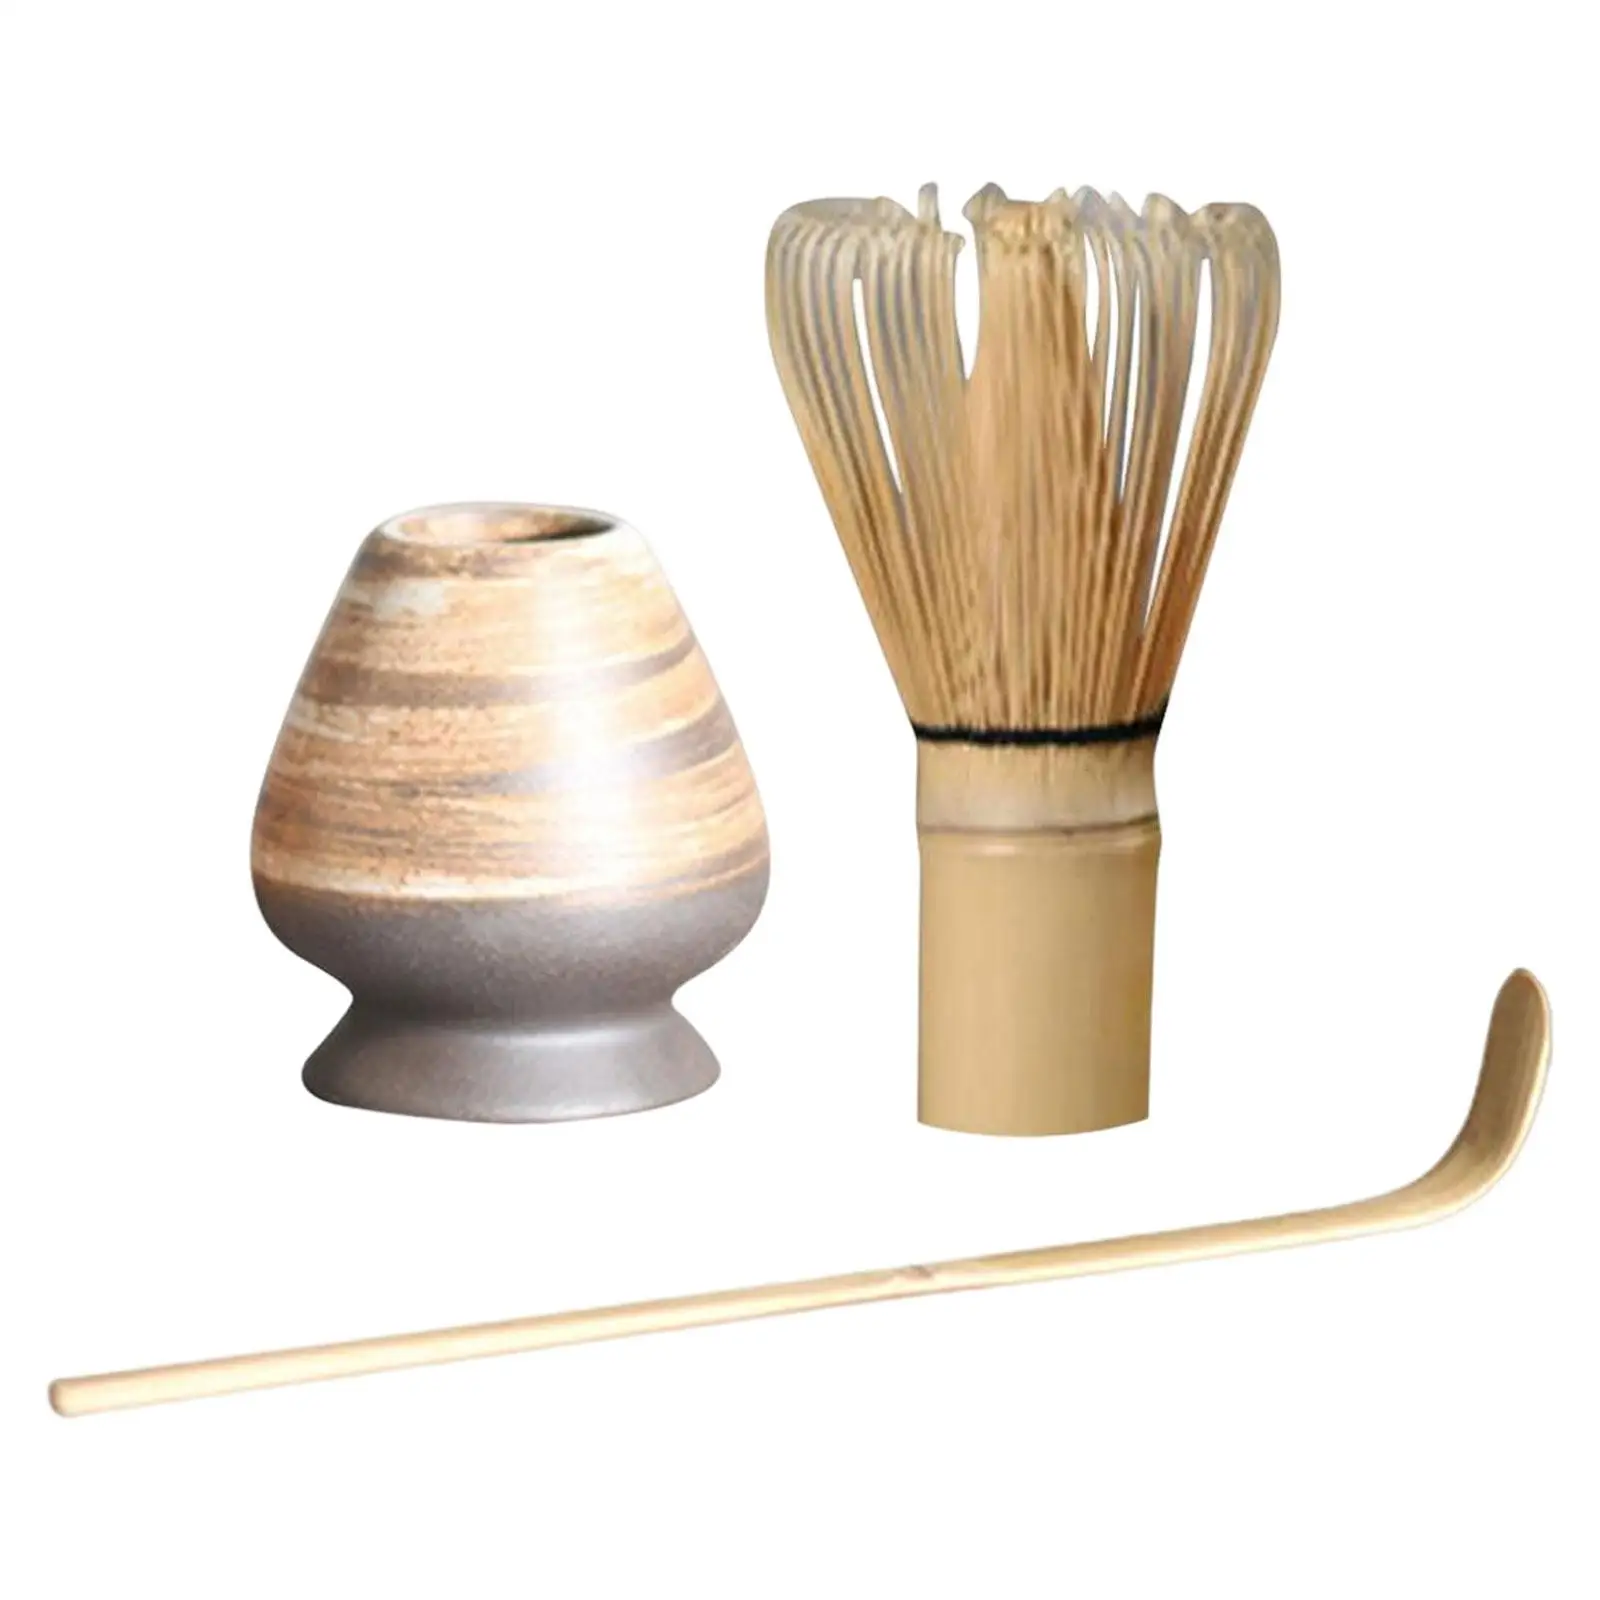 Traditional Japanese Matcha Ceremony Set Tea Making Tools for Matcha Ceremony Holiday Gifts